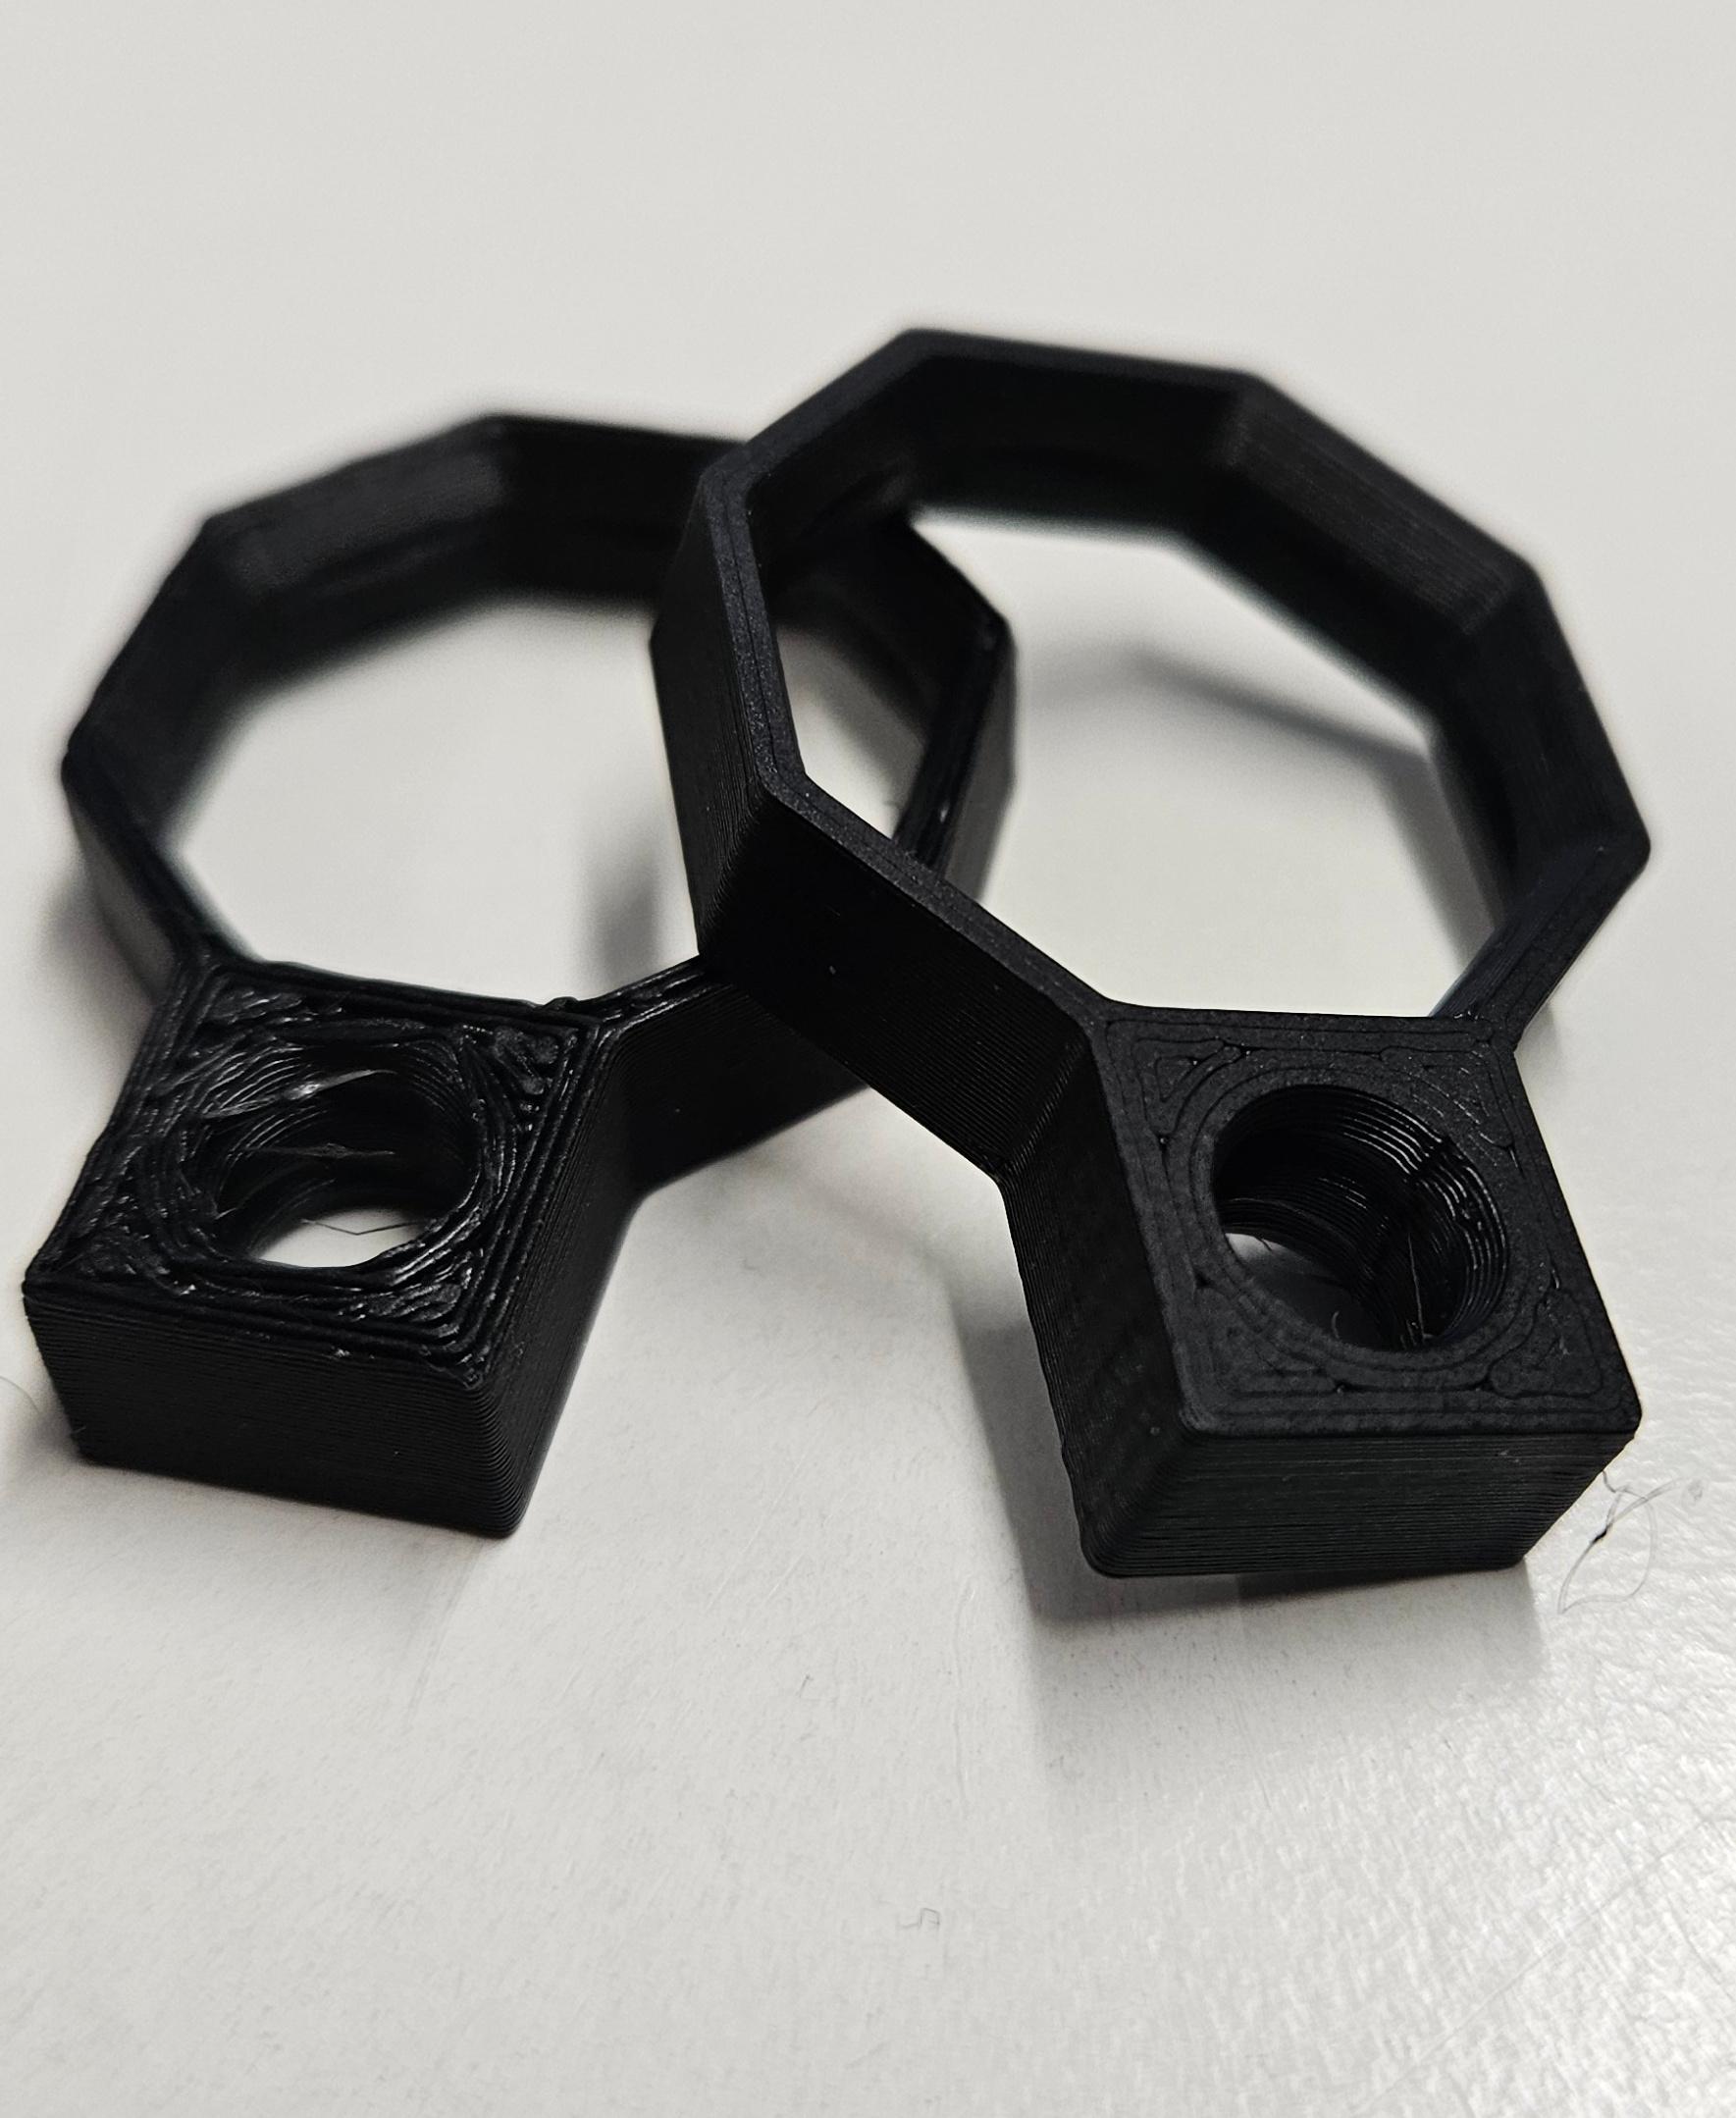 Multiboard Tile Key Chain, Stack Print Test - I did not expect to work as well as it did. 

Printed in Prusament PETG Matte Black on my Prusa XL5 - 3d model